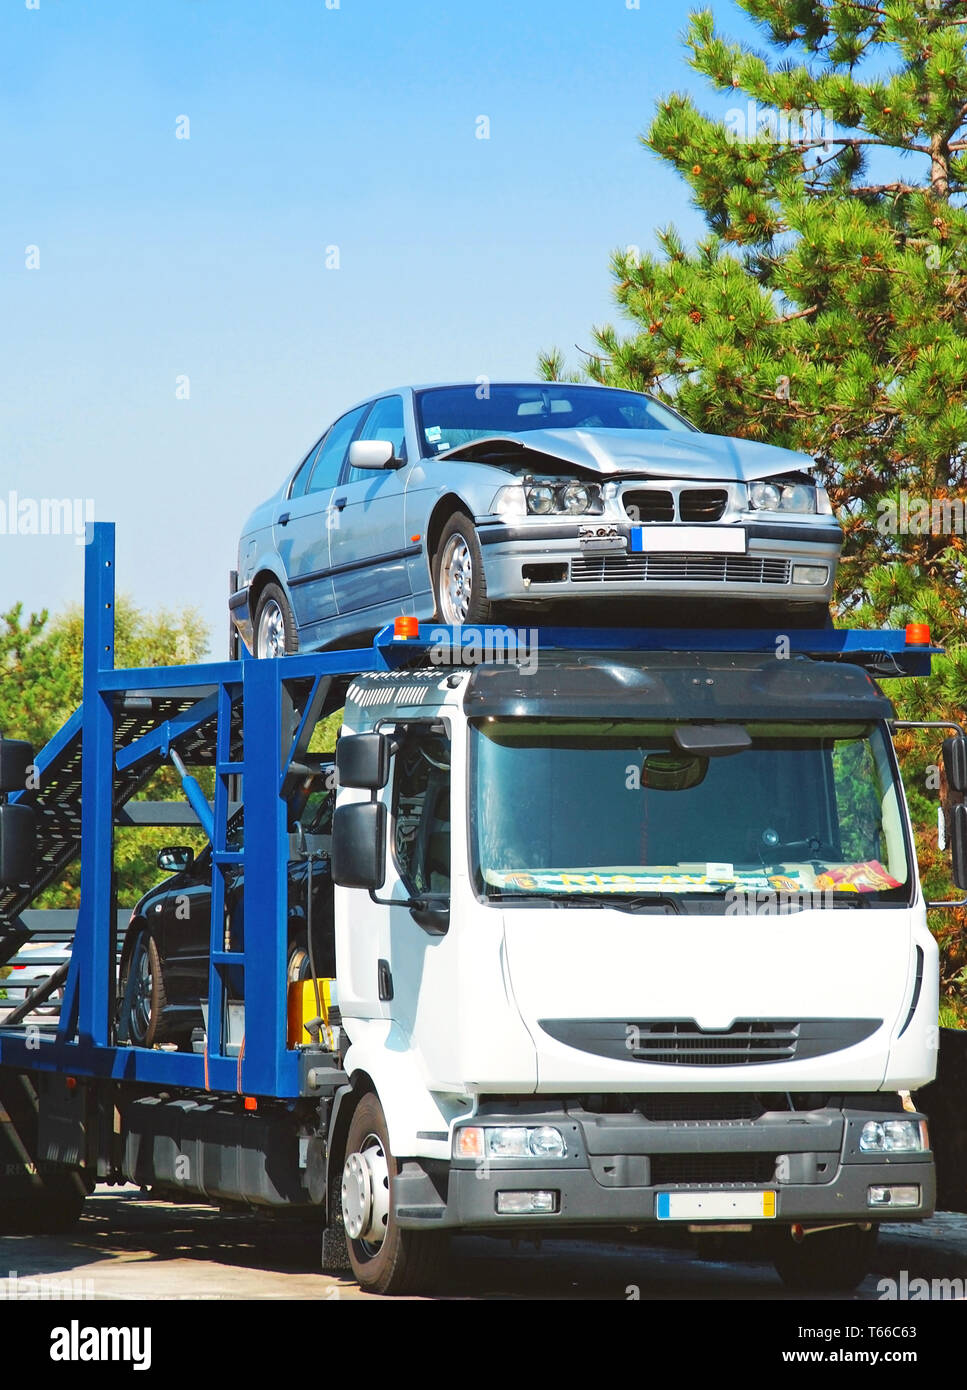 Truck carrying a car after a road accident Stock Photo